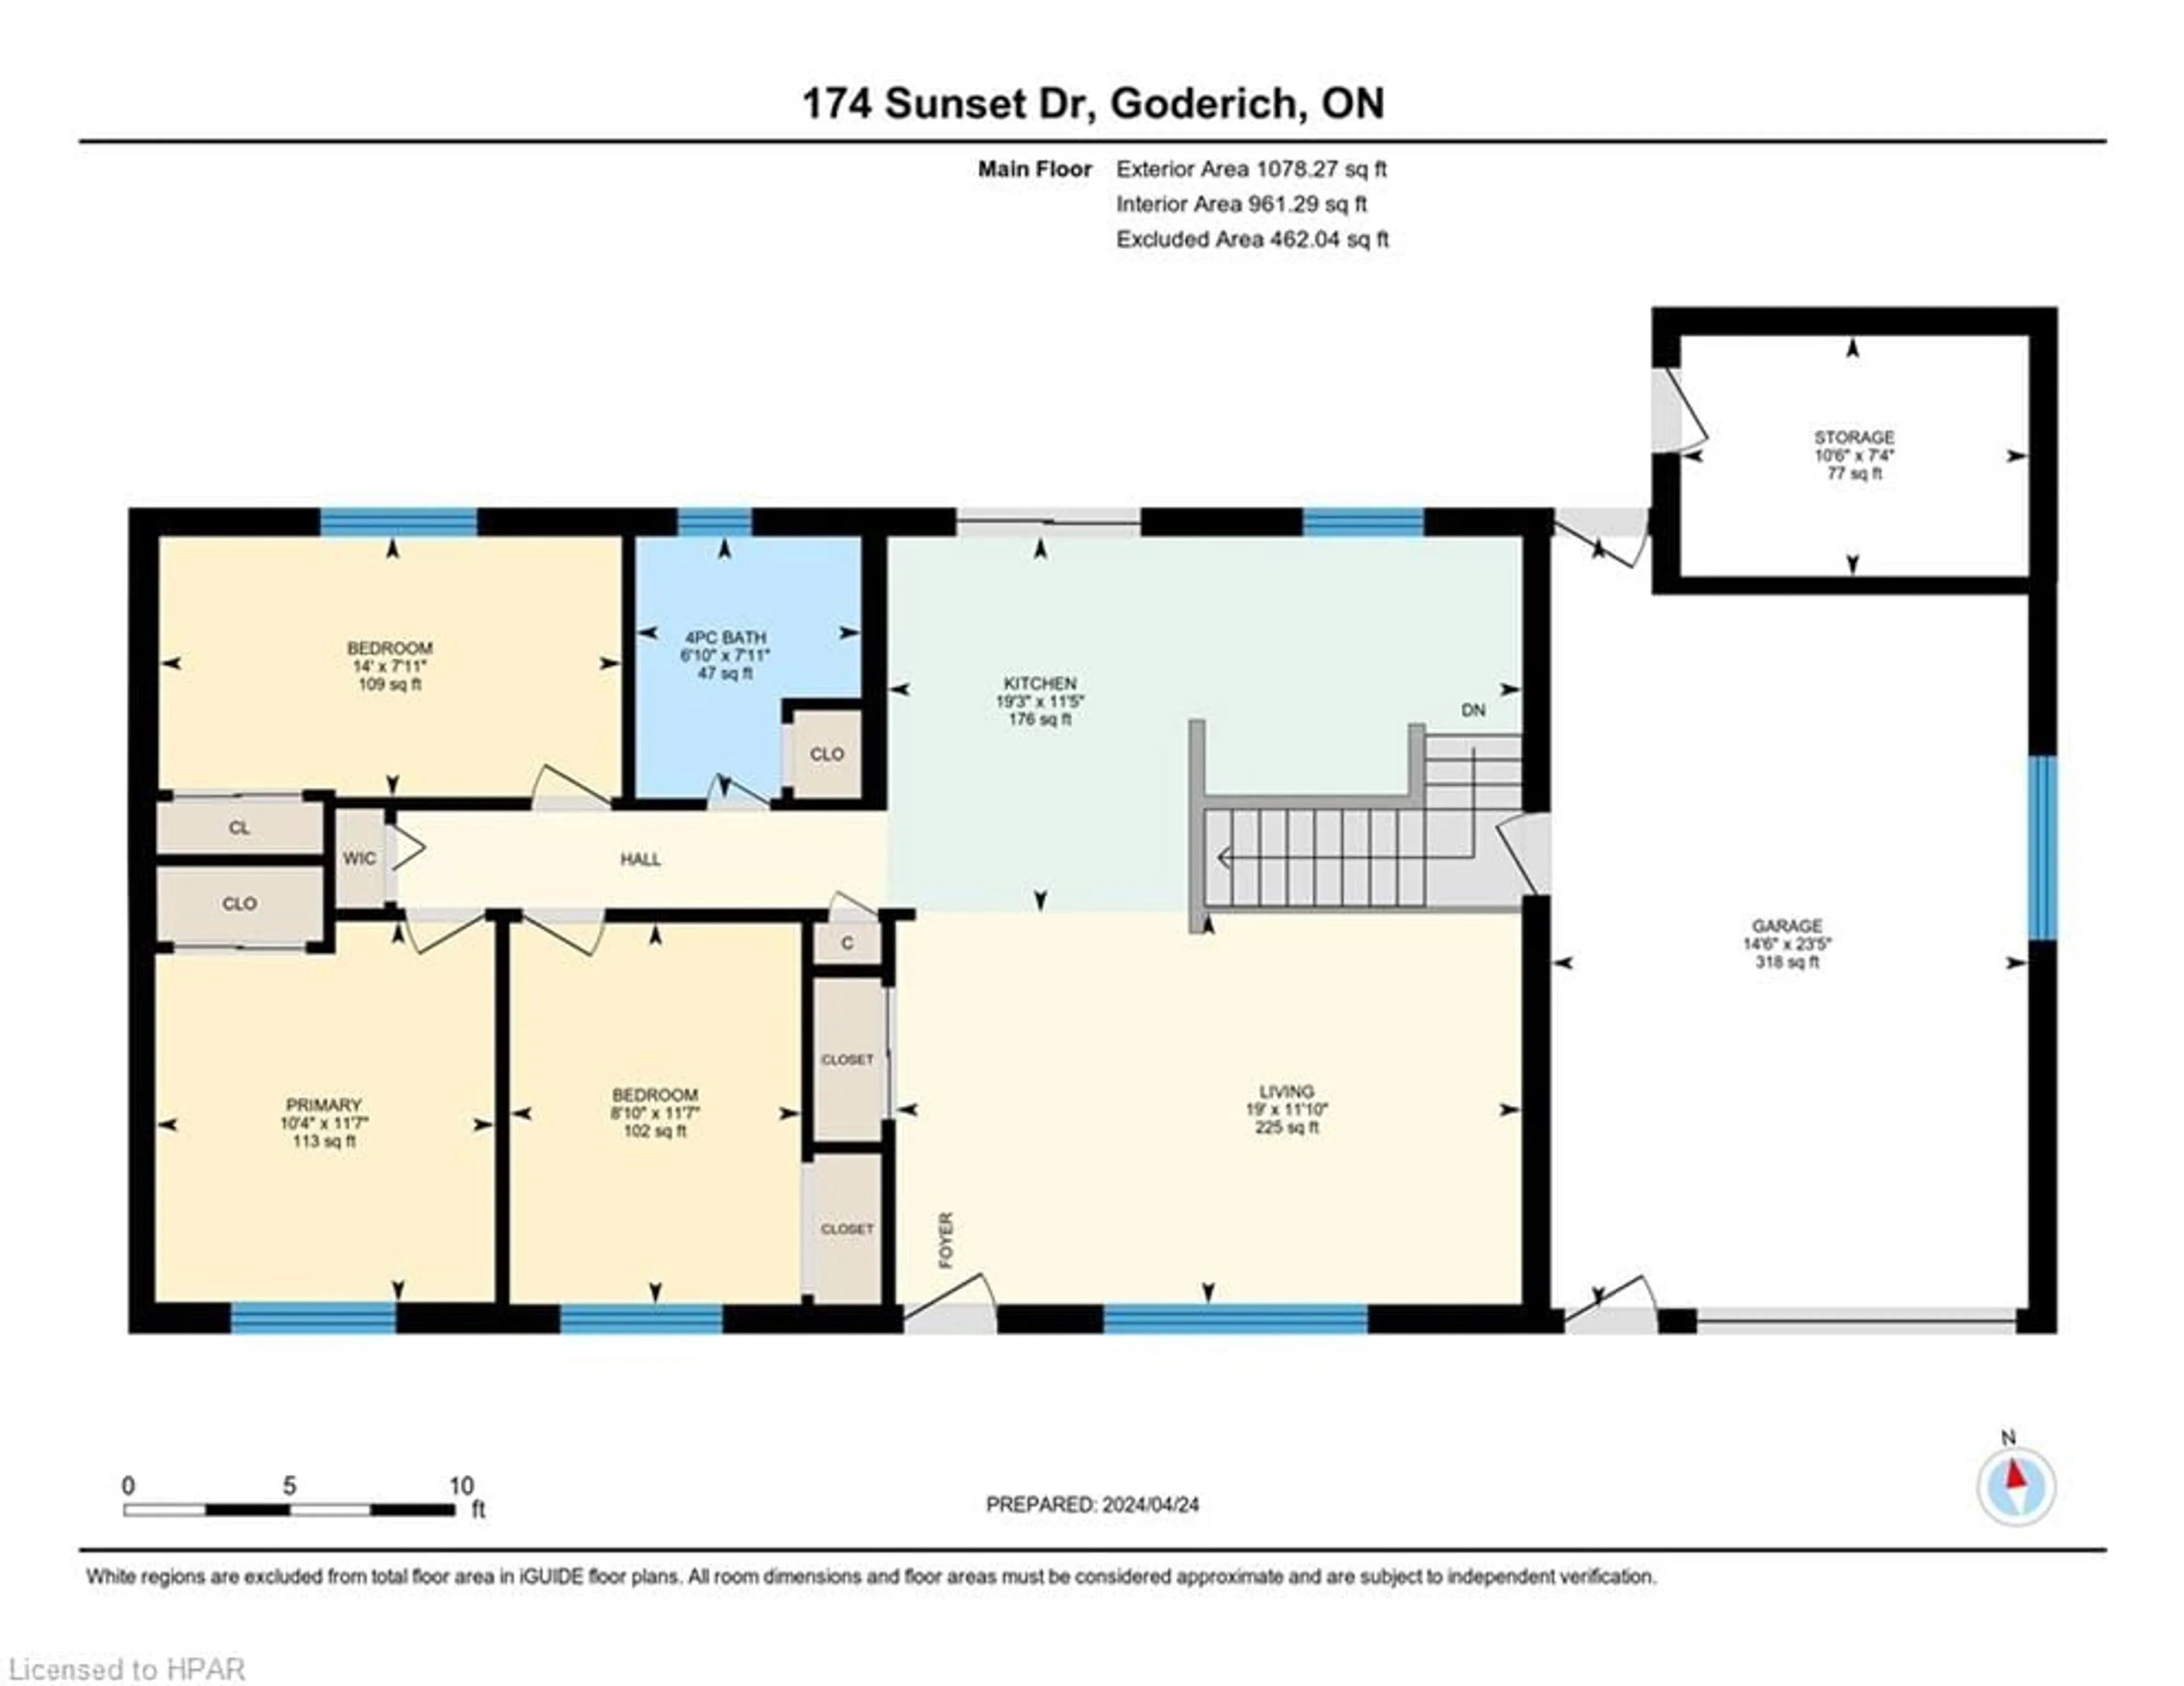 Floor plan for 174 Sunset Dr, Goderich Ontario N7A 1X2